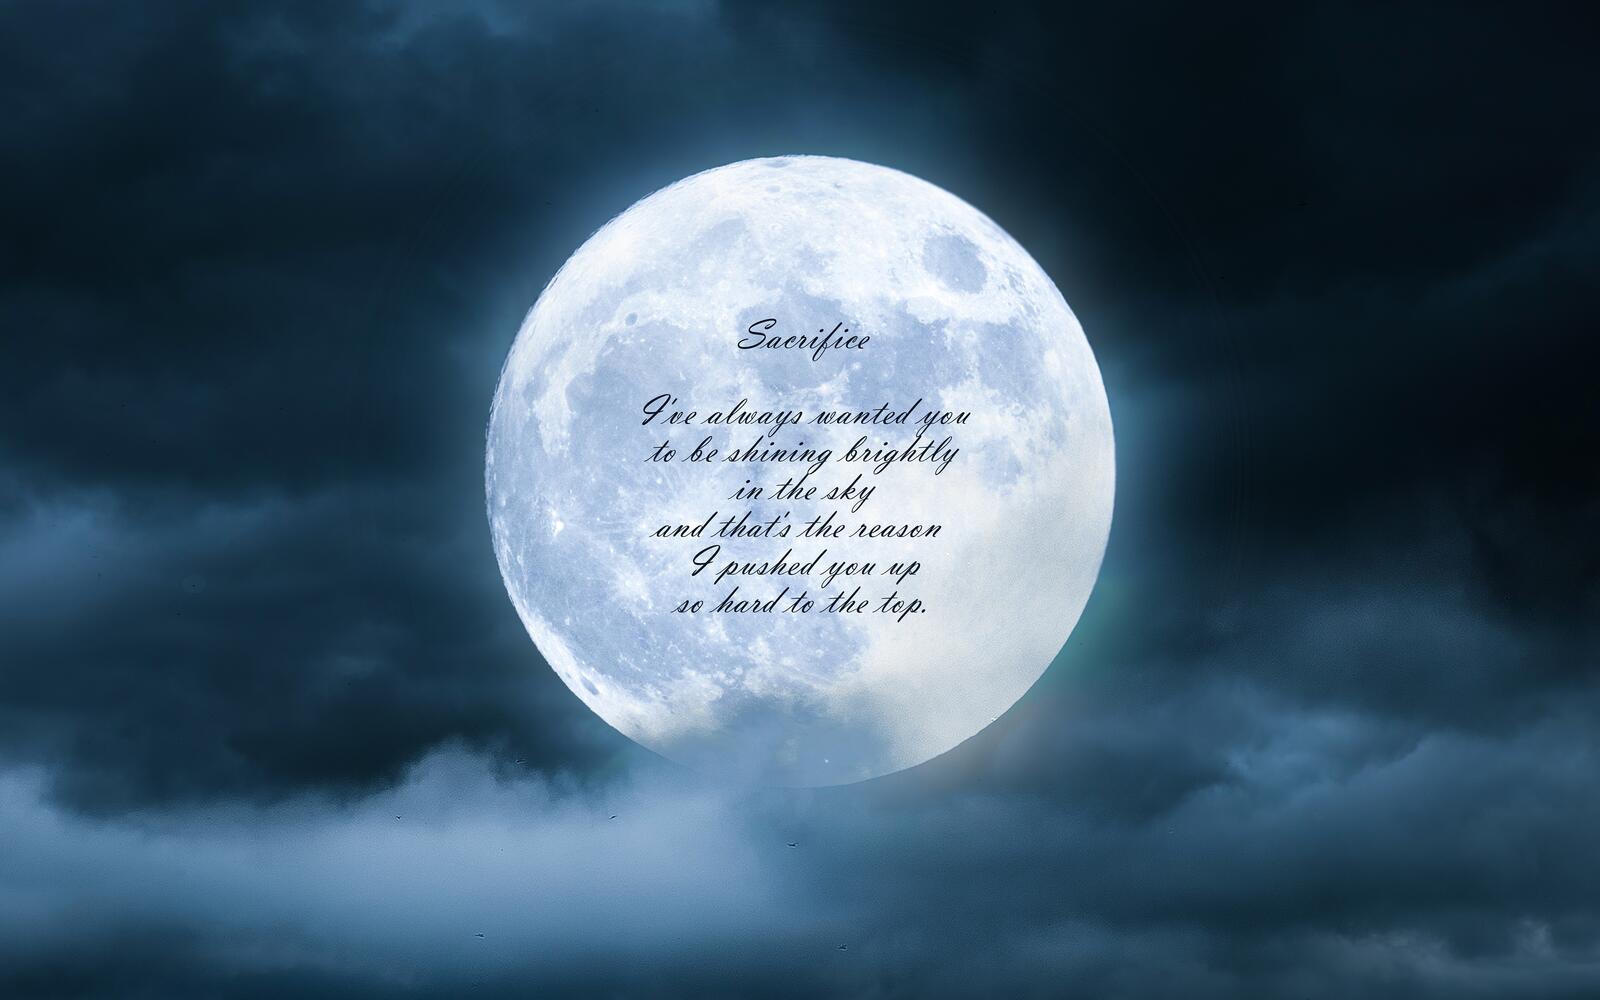 Wallpapers wallpaper moon clouds quote about sacrifice on the desktop